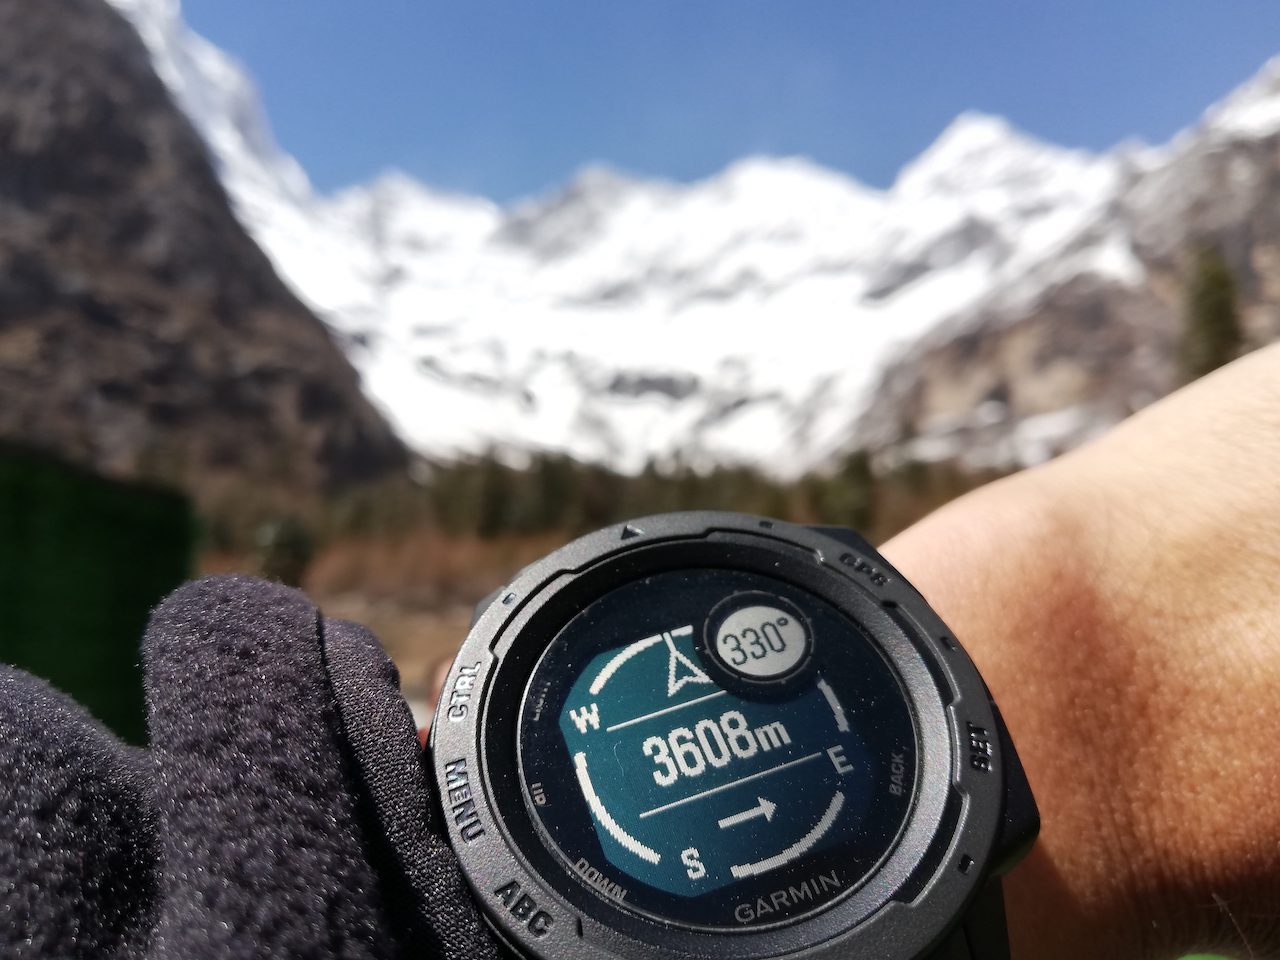 Tracking aerobic activity while hiking